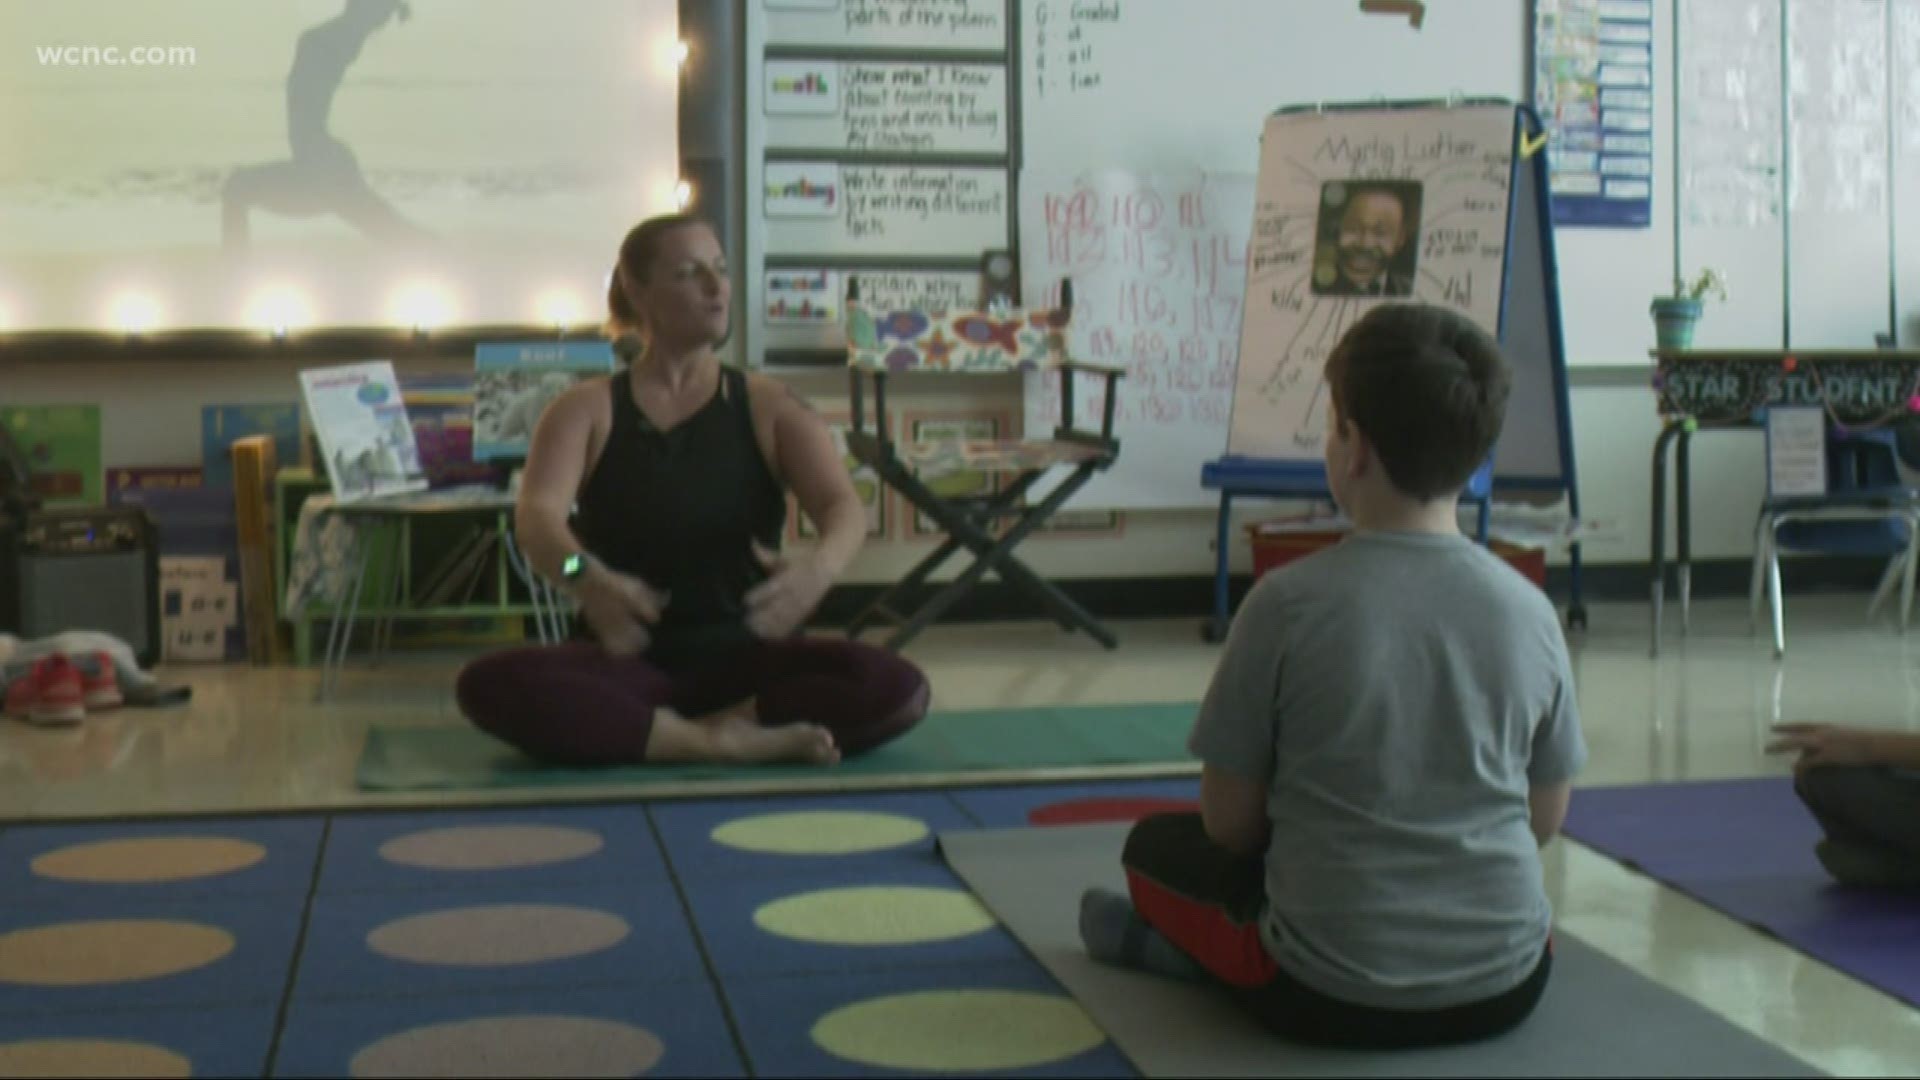 Roughly 20 students and a handful of teachers spend an hour after school every other week to practice yoga to help reduce stress, anger management, increased foucs.